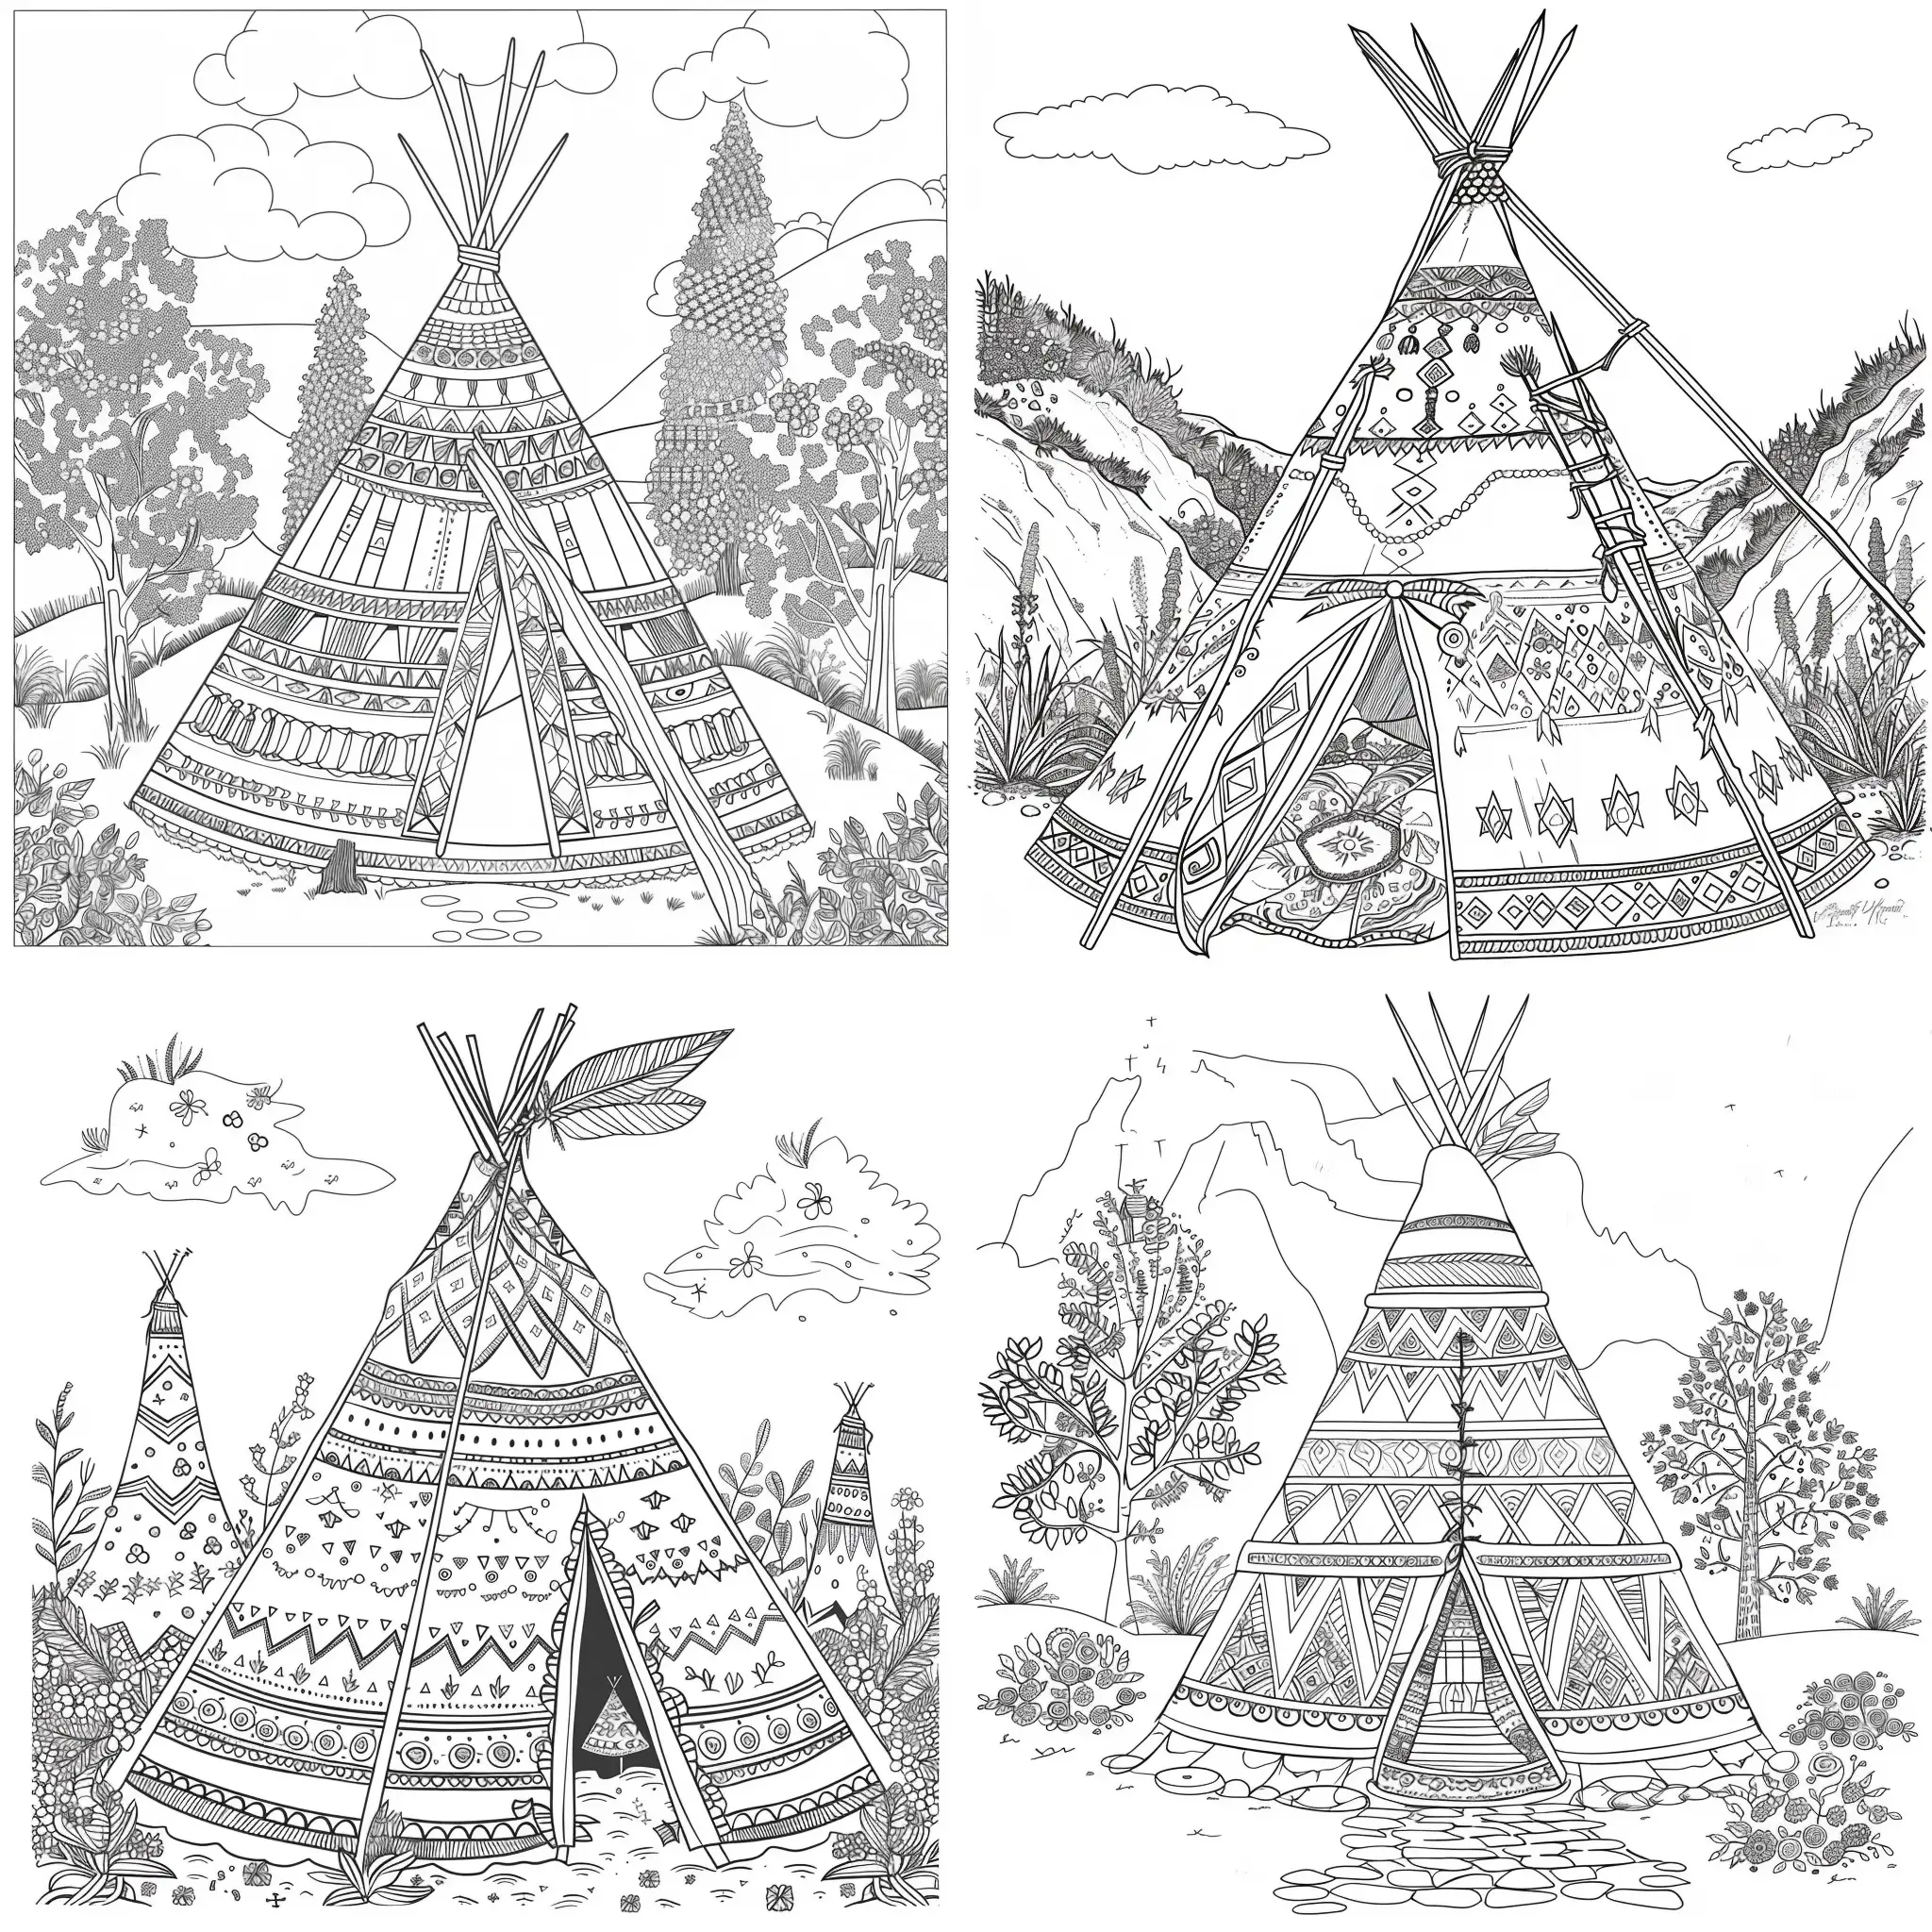 Imagine a coloring book page with a decorated Tipi and no background